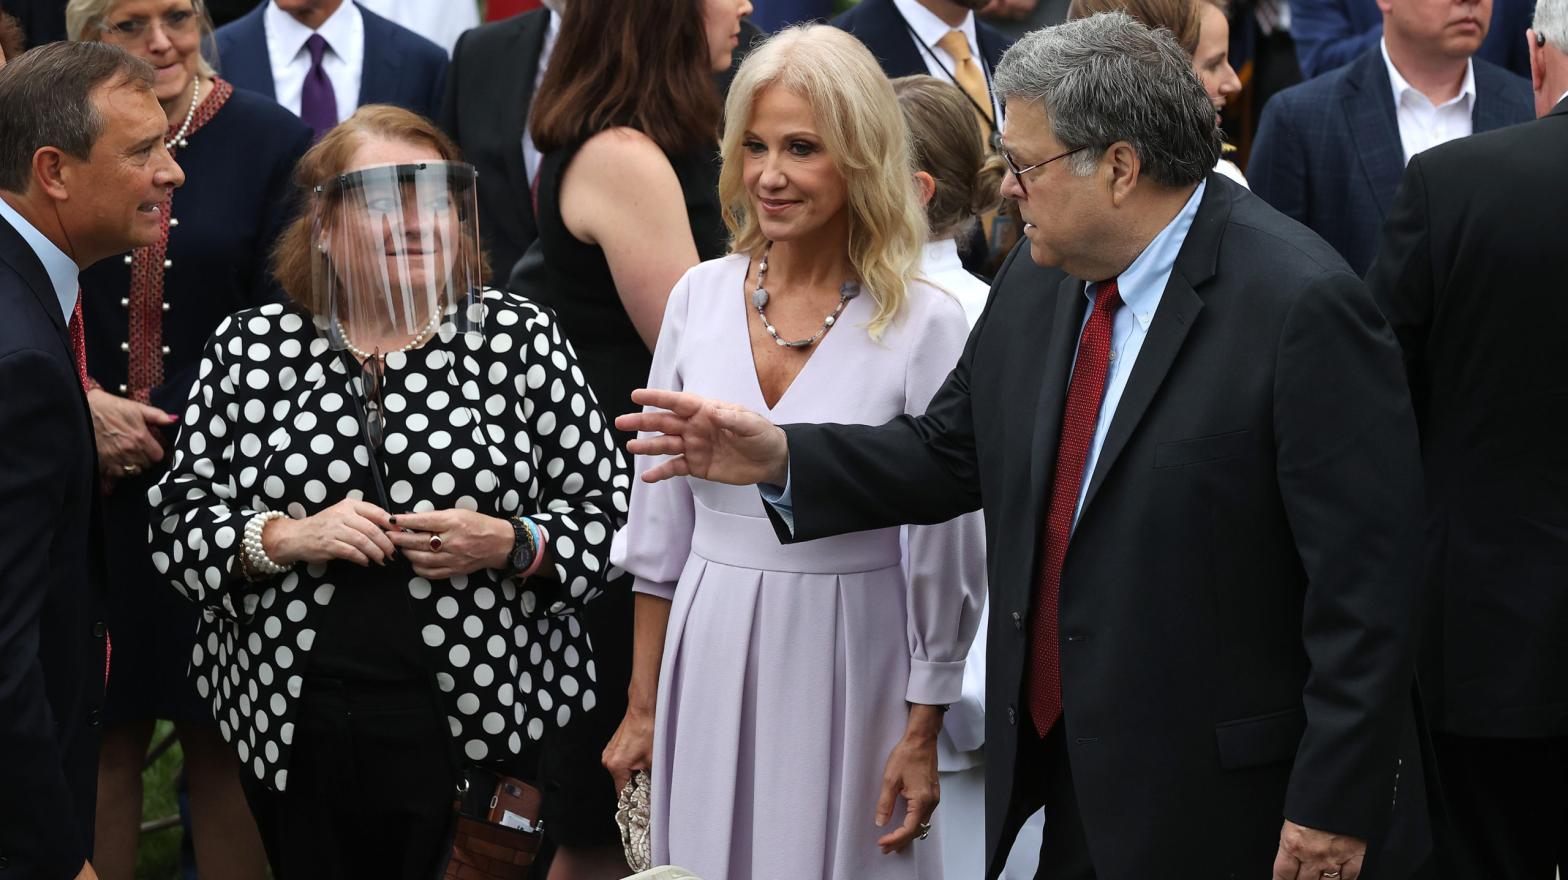 Kellyanne Conway (centre) is seen with Attorney General William Barr (right) and guests at the Rose Garden Supreme Court nomination event on Sept. 26. At least seven people in attendance that day have tested positive for covid-19 since, including President Donald Trump. (Photo:  Chip Somodevilla, Getty Images)